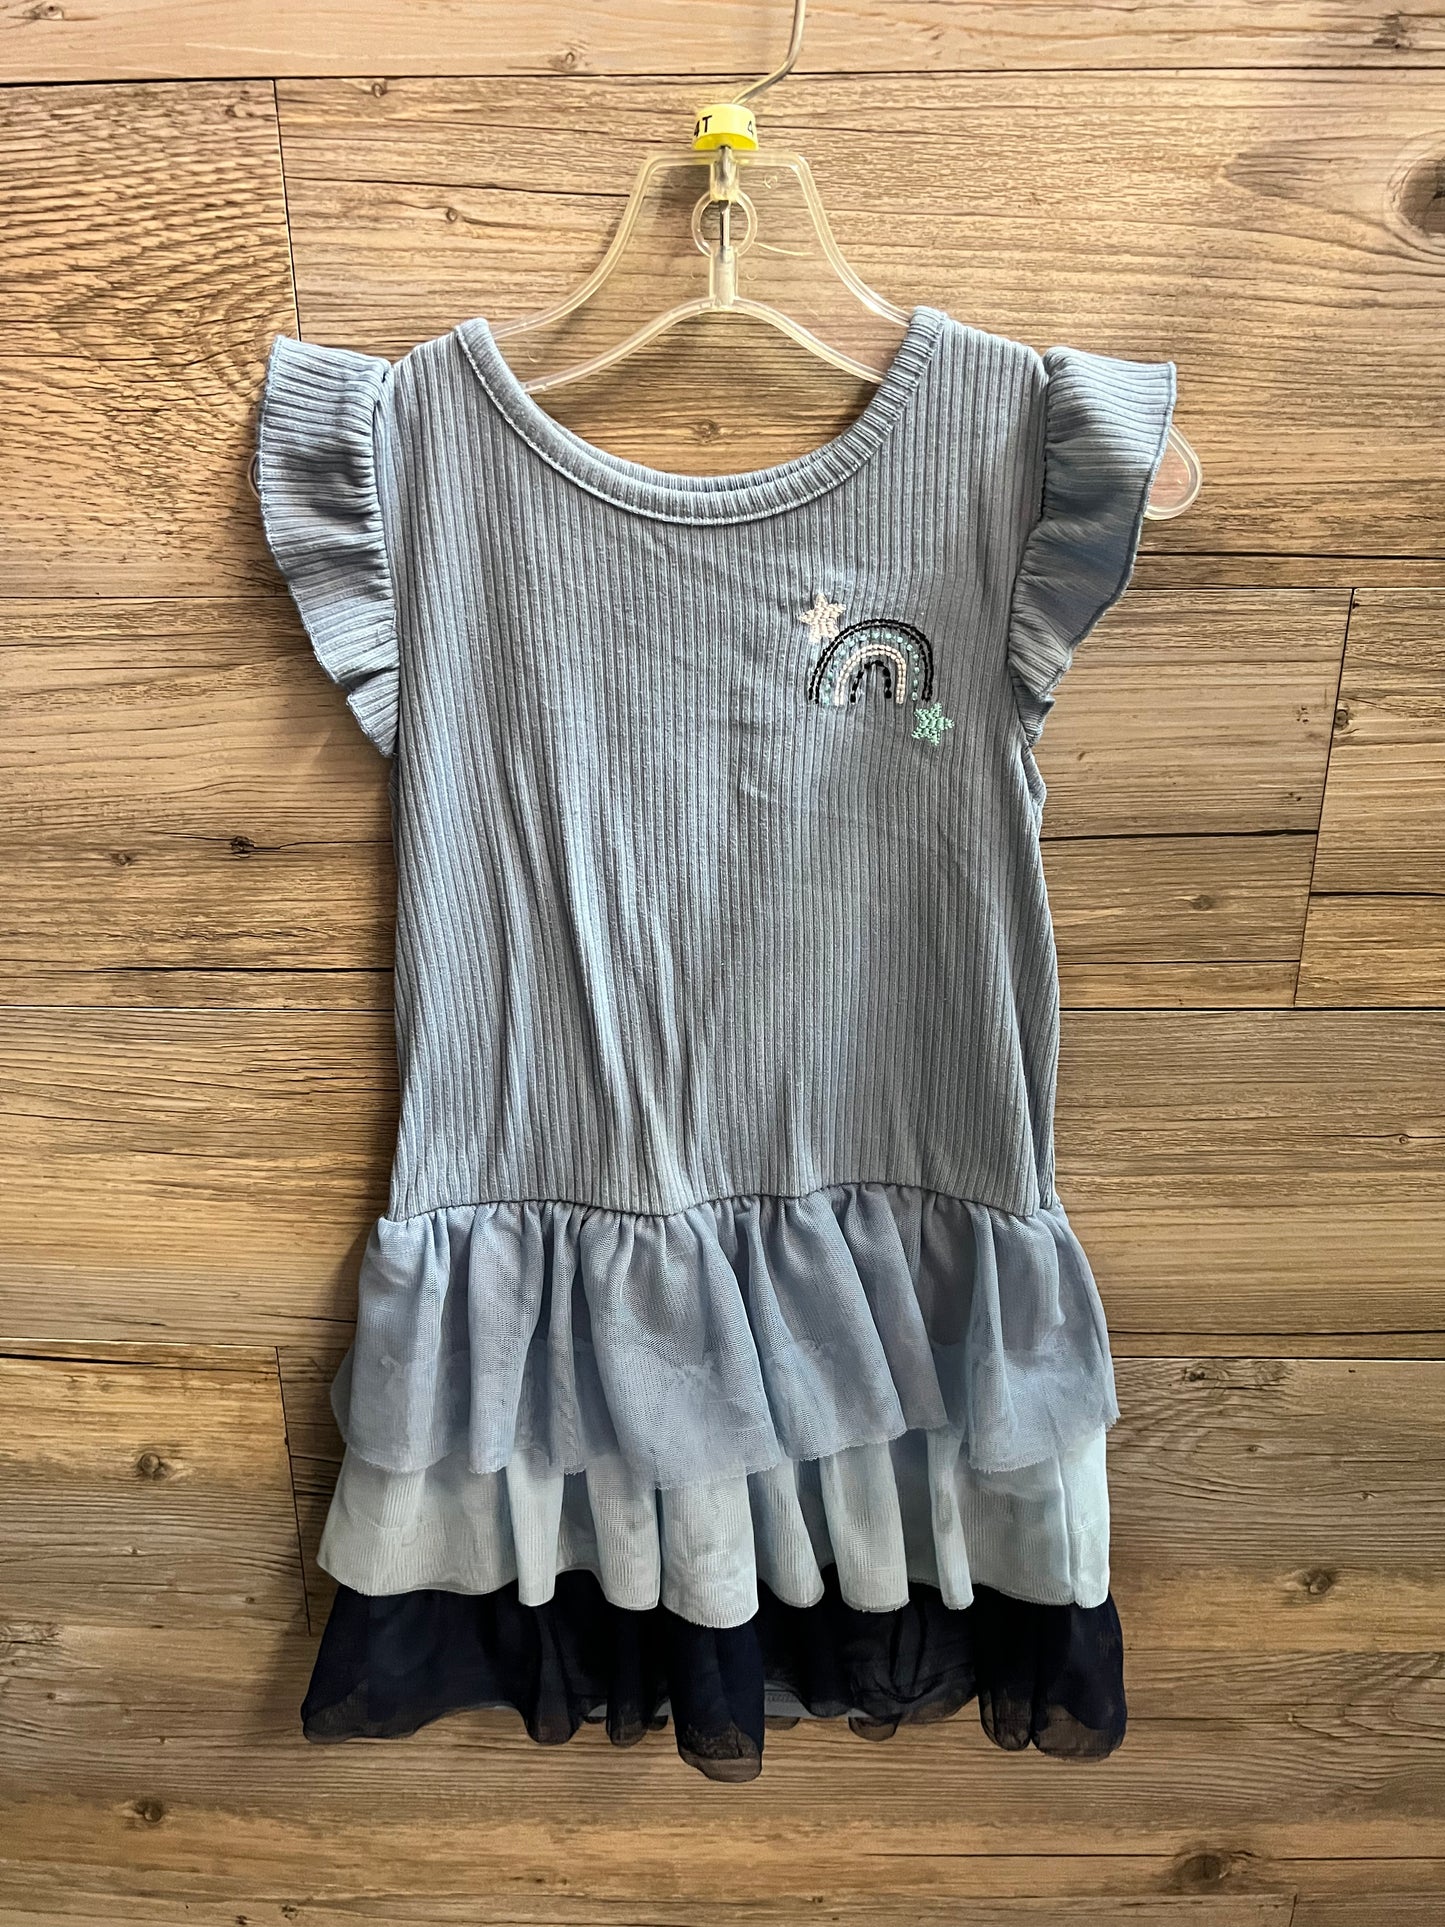 Epic Threads Dress, Size 4T